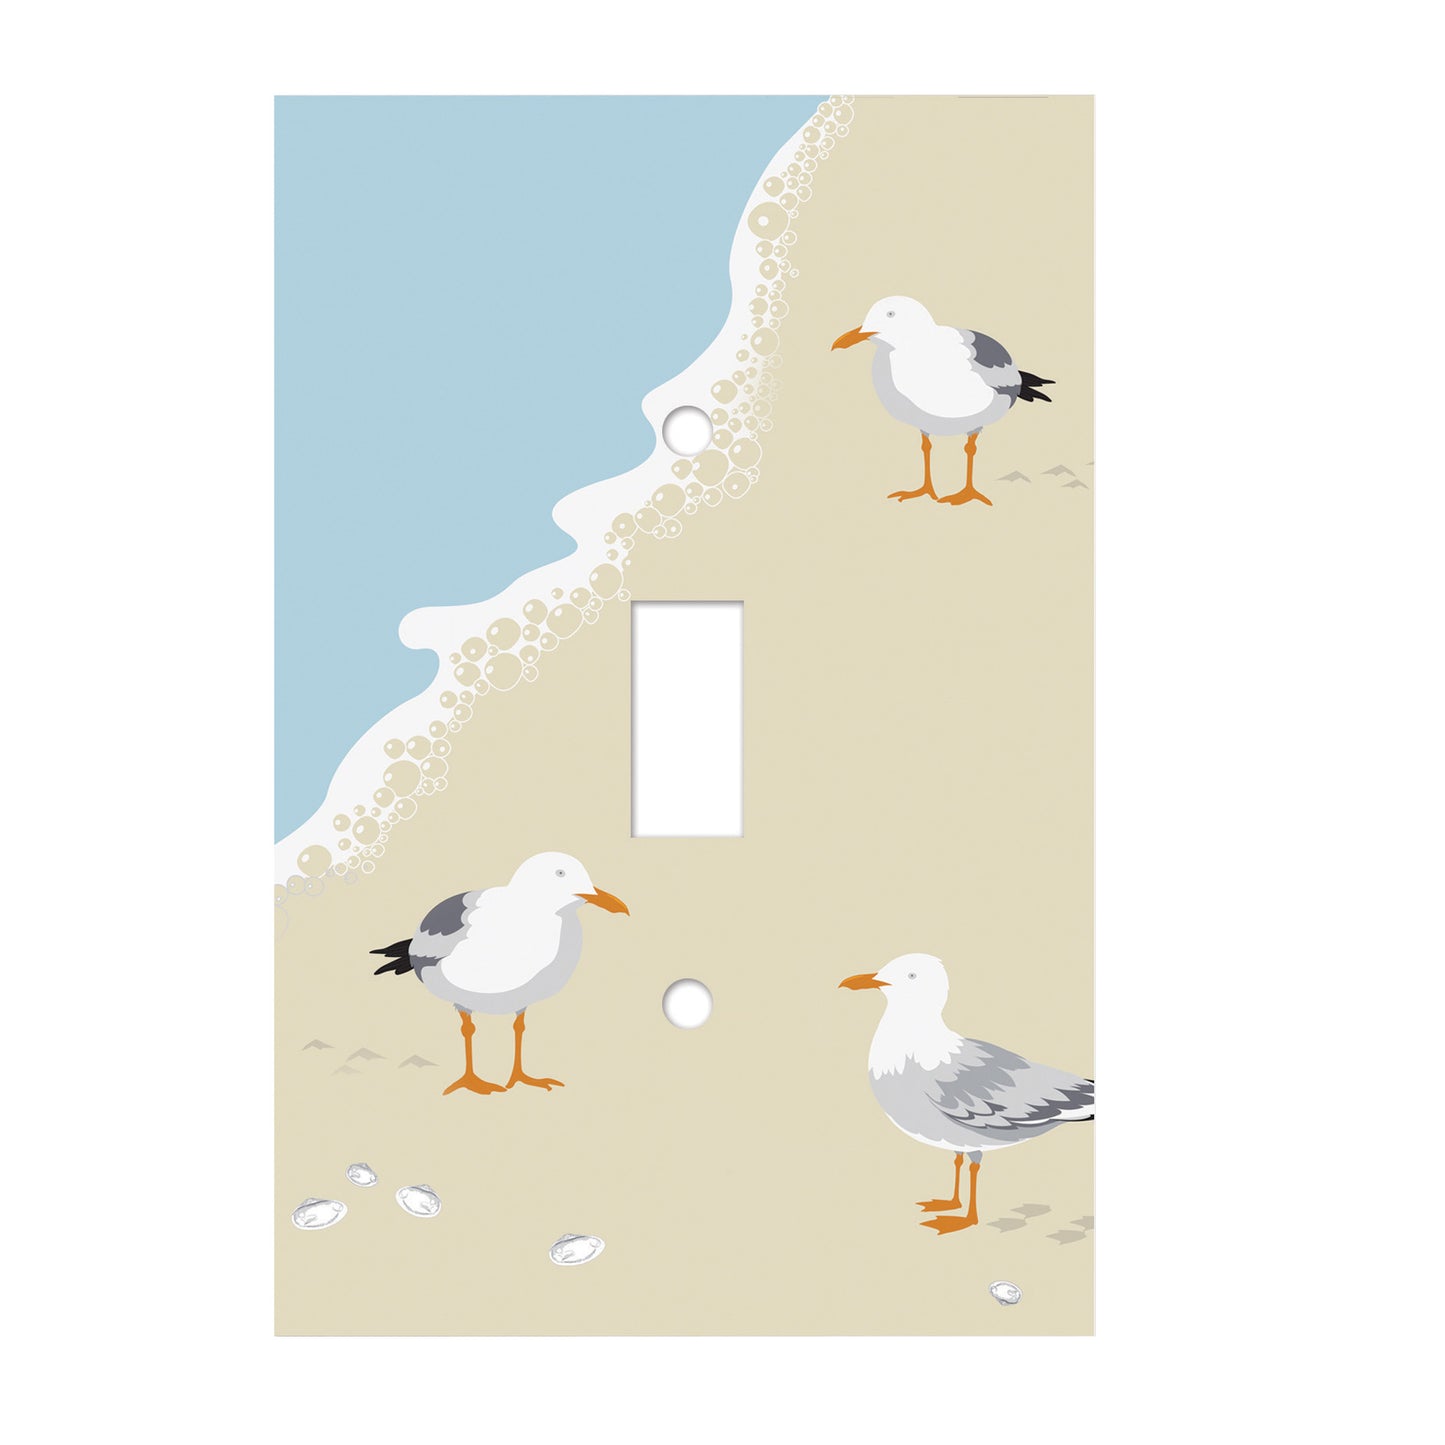 ceramic single toggle switchplate featuring seagulls standing on the beach.